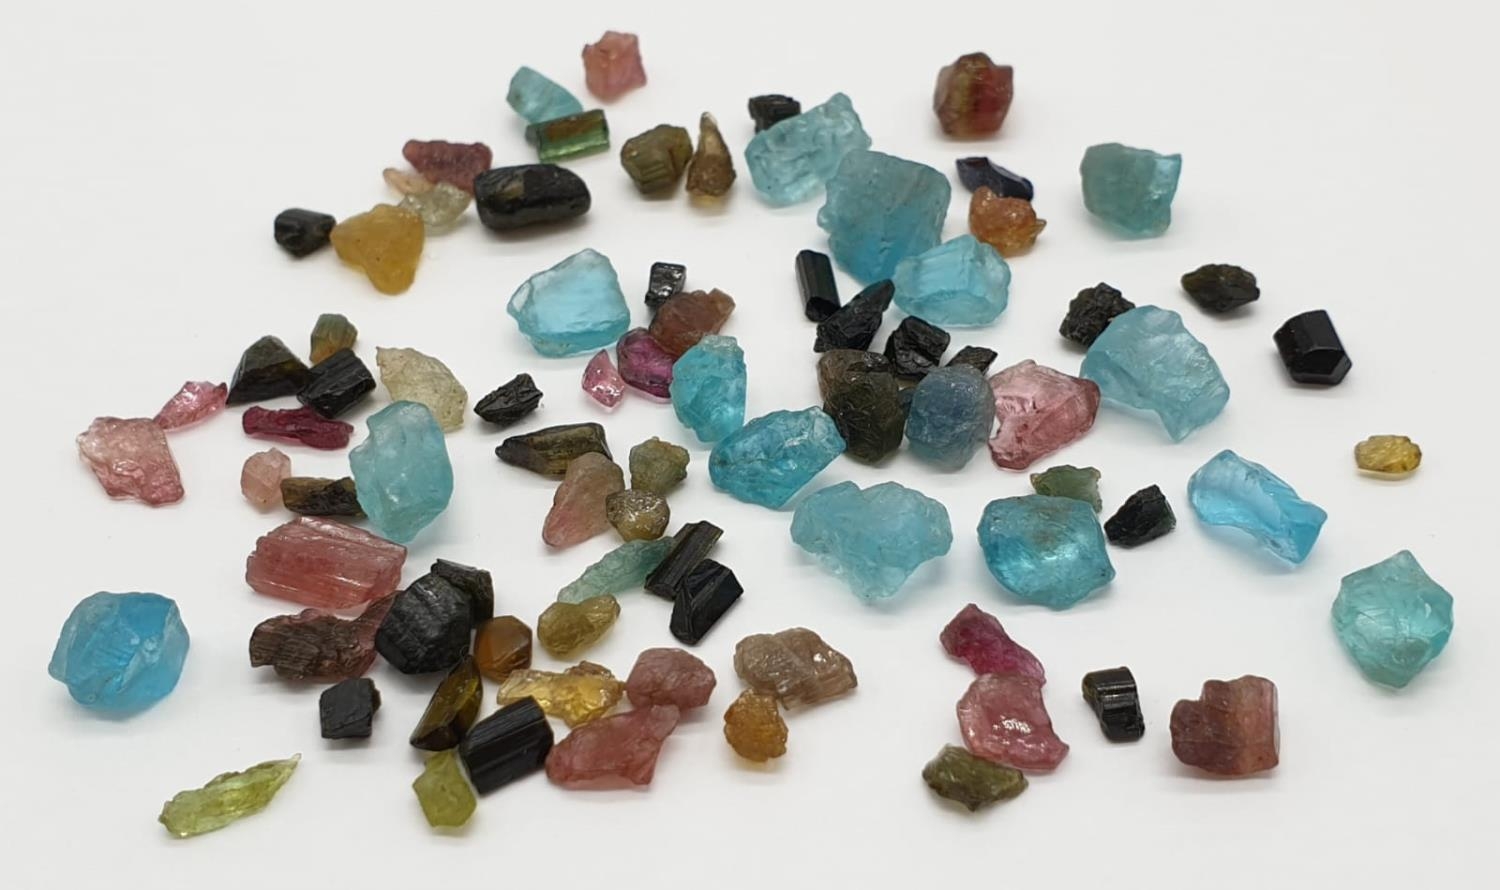 62cts rough tourmalines and apatite gemstone - Image 2 of 3